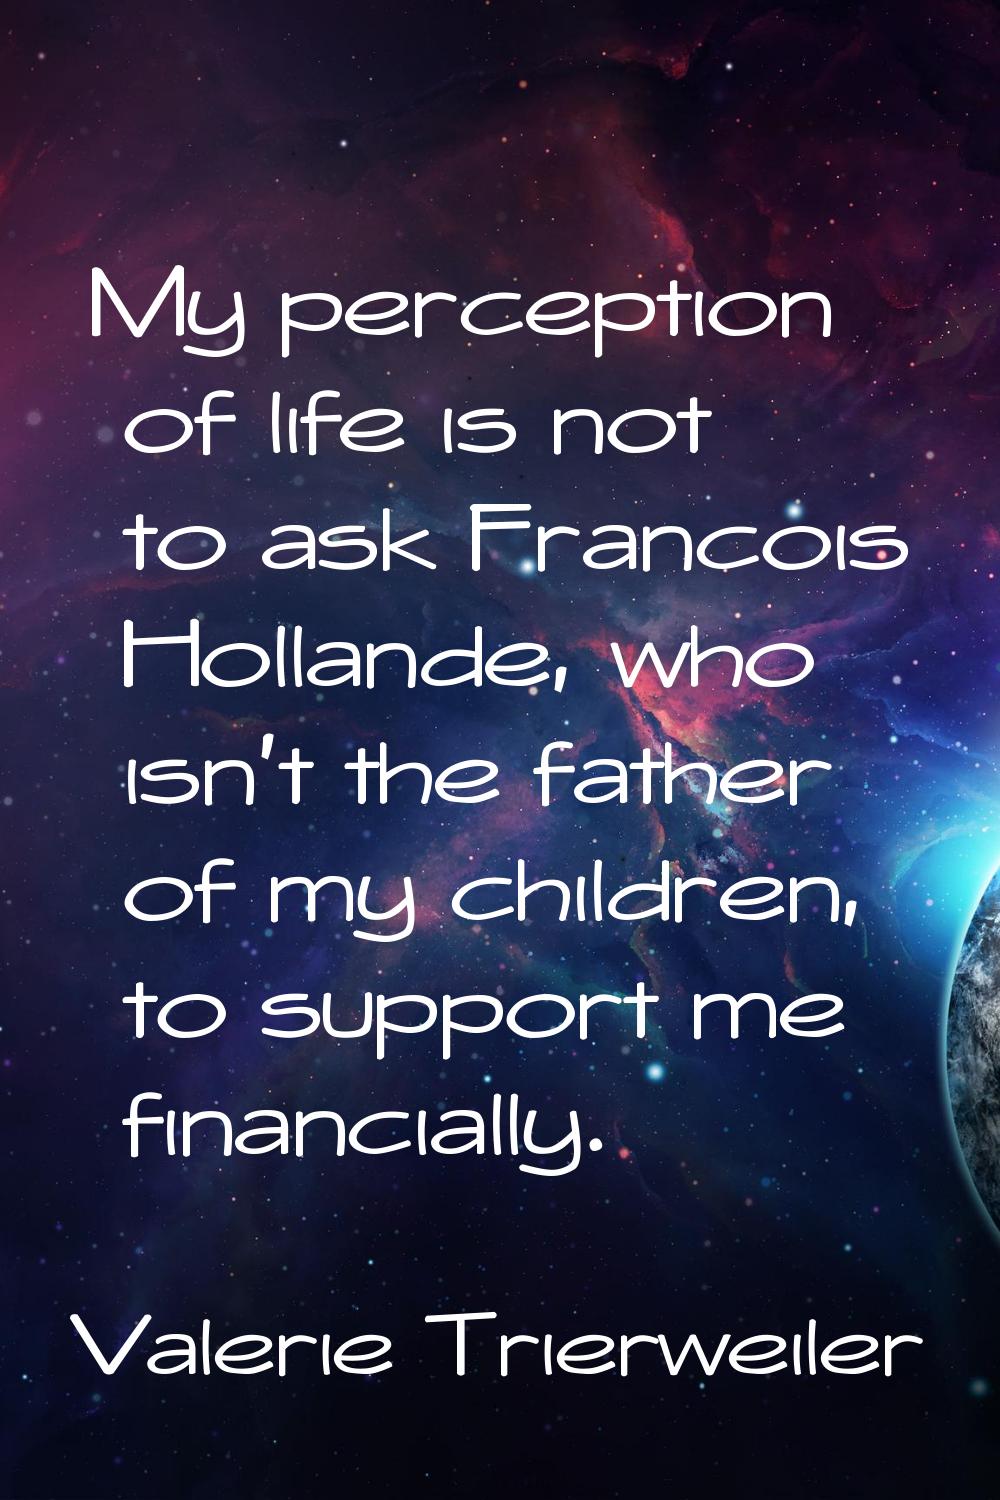 My perception of life is not to ask Francois Hollande, who isn't the father of my children, to supp